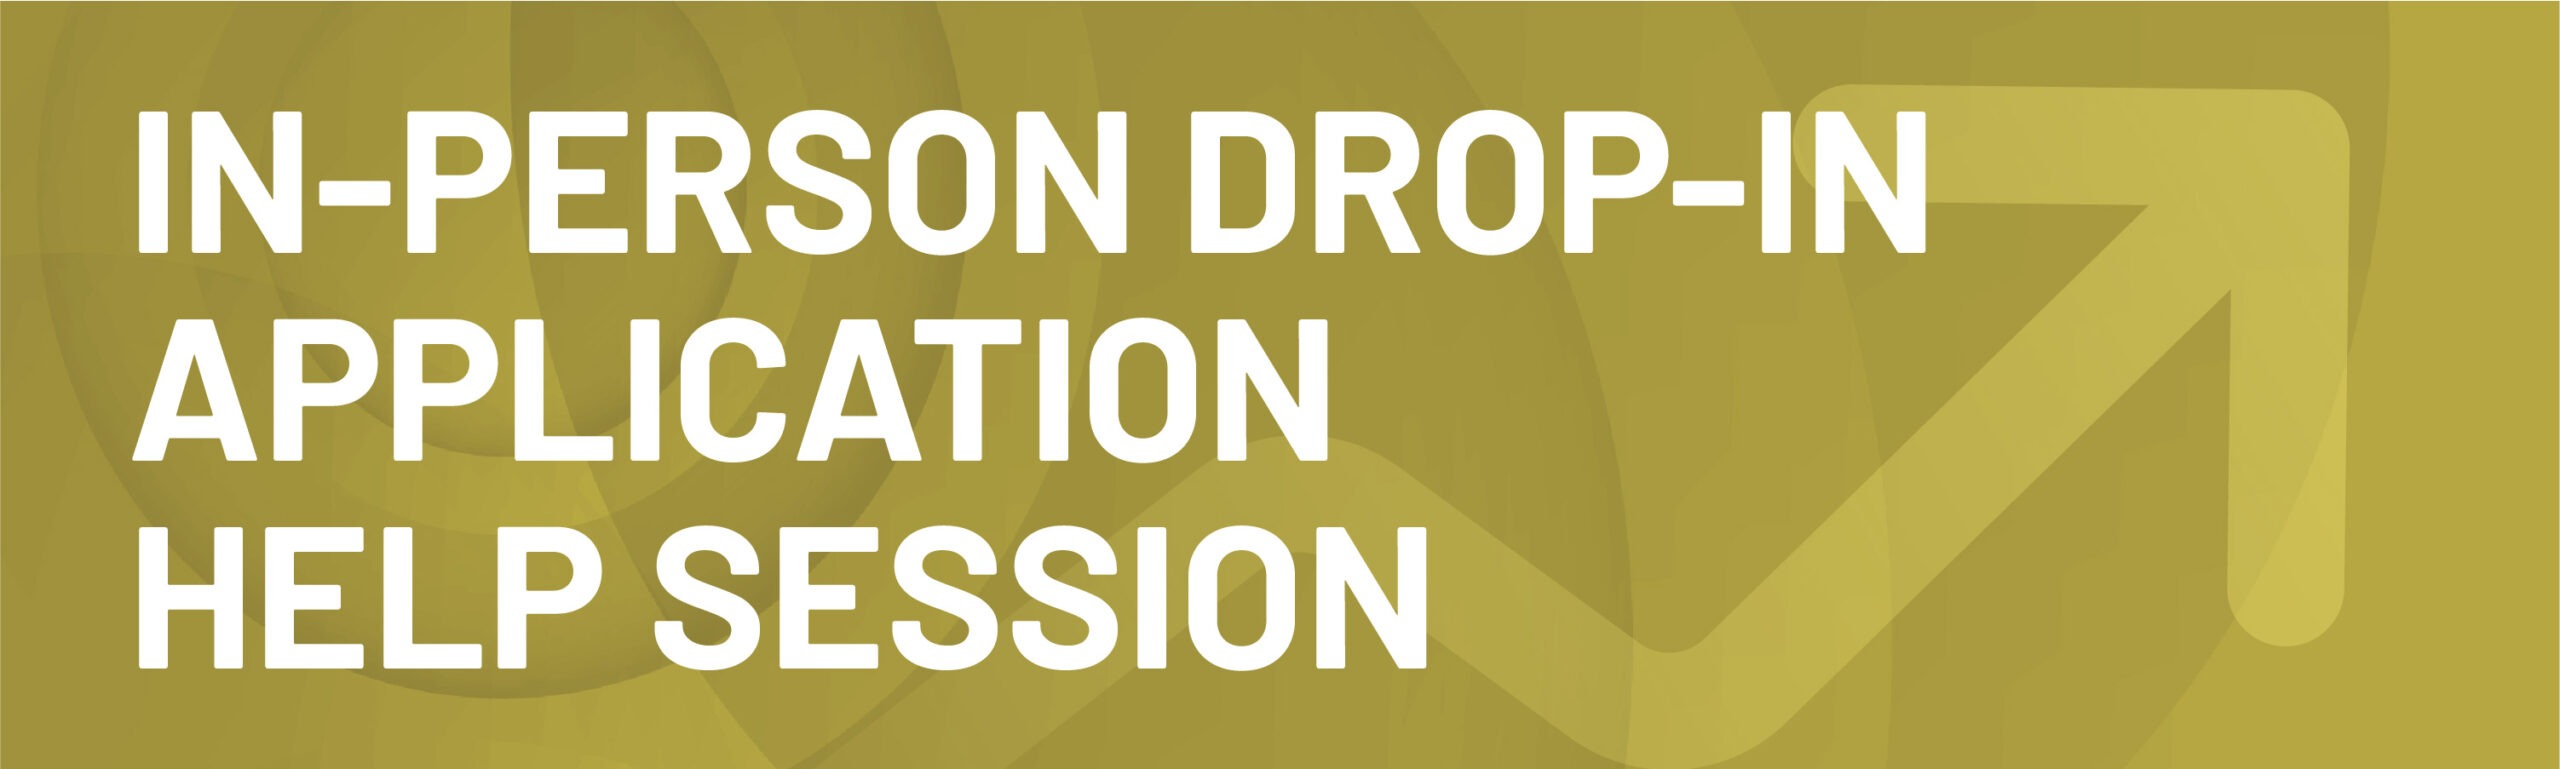 Drop-in Help Desk Session (in-person)